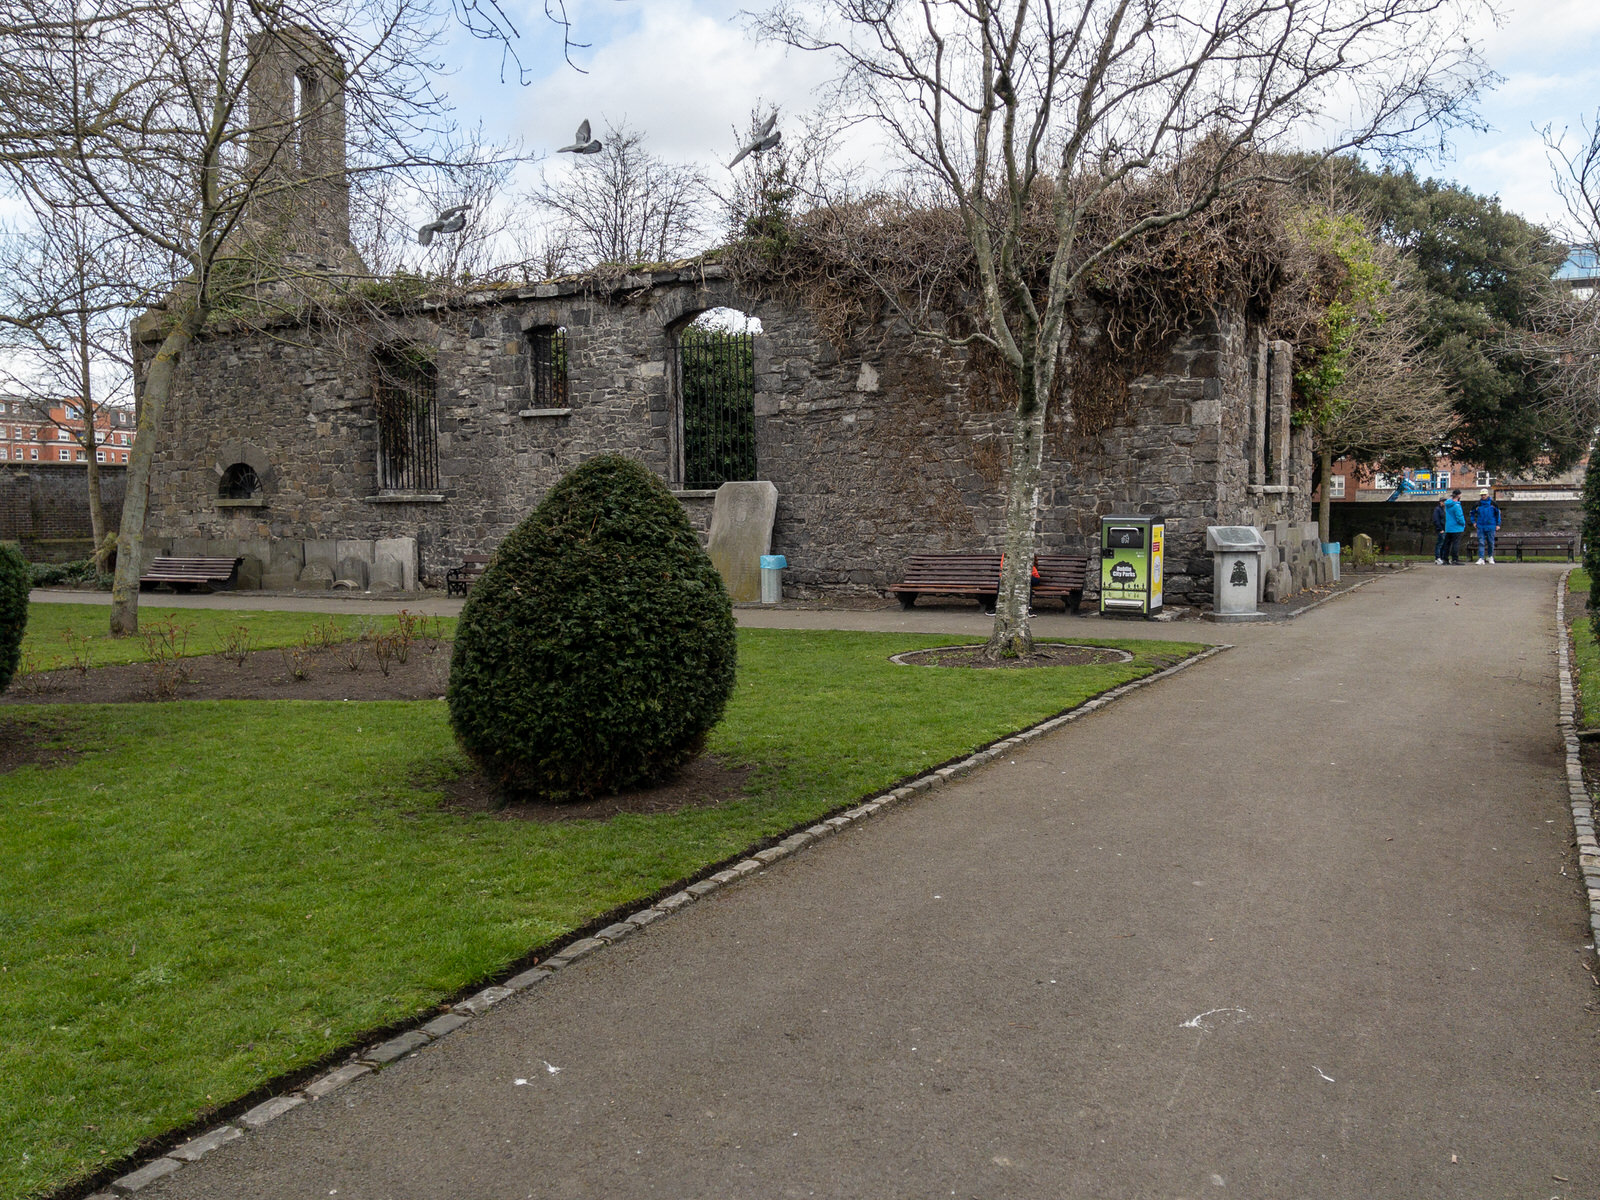 ST KEVIN'S PARK AND CHURCH RUINS